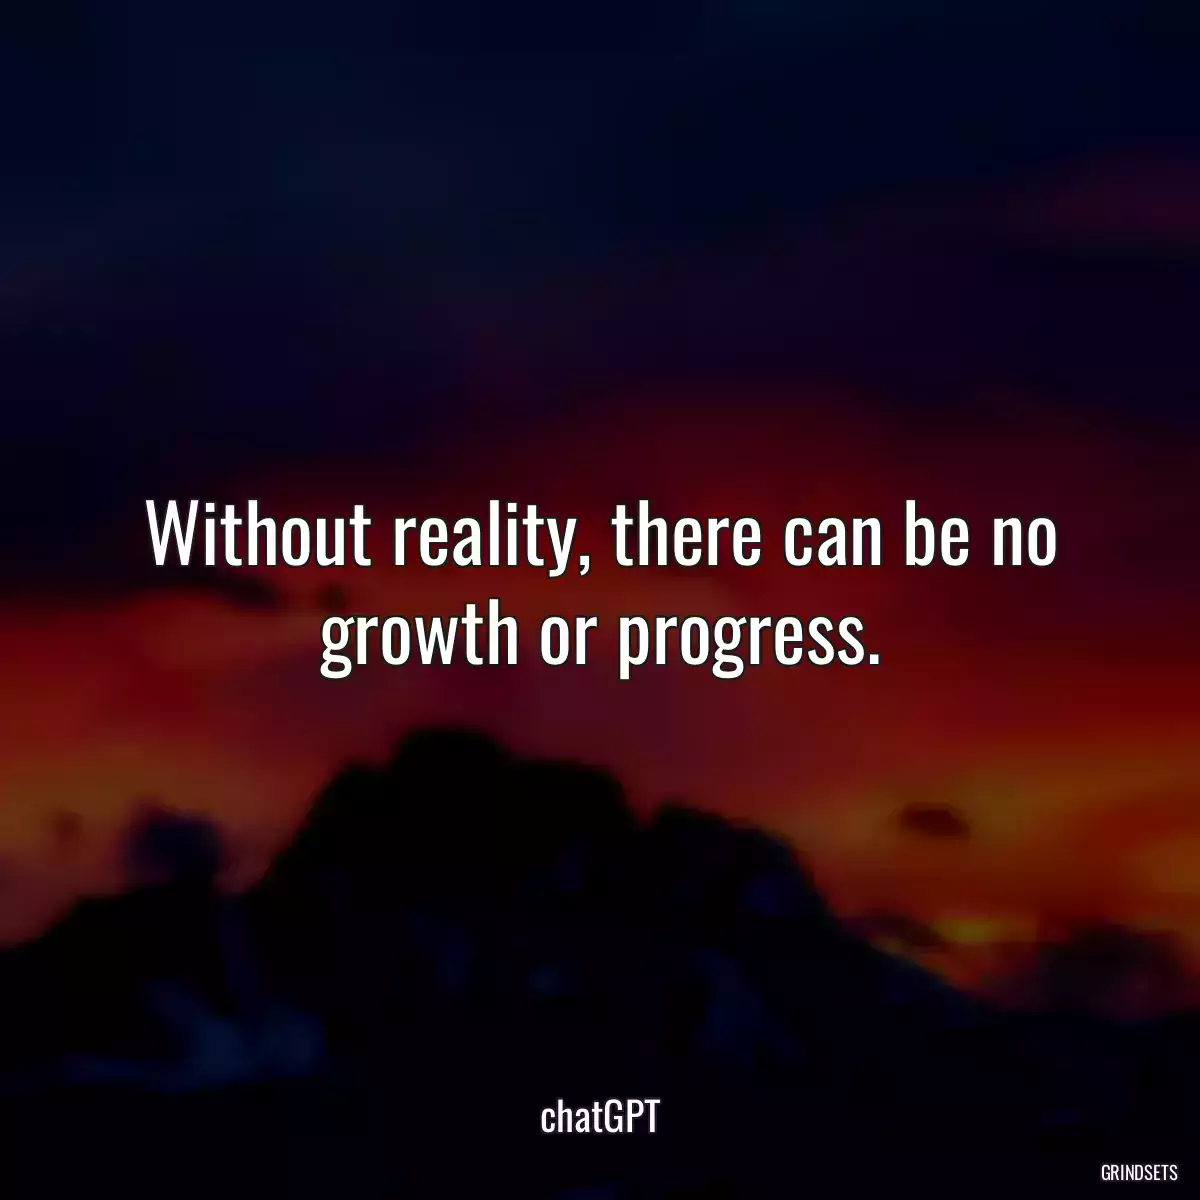 Without reality, there can be no growth or progress.